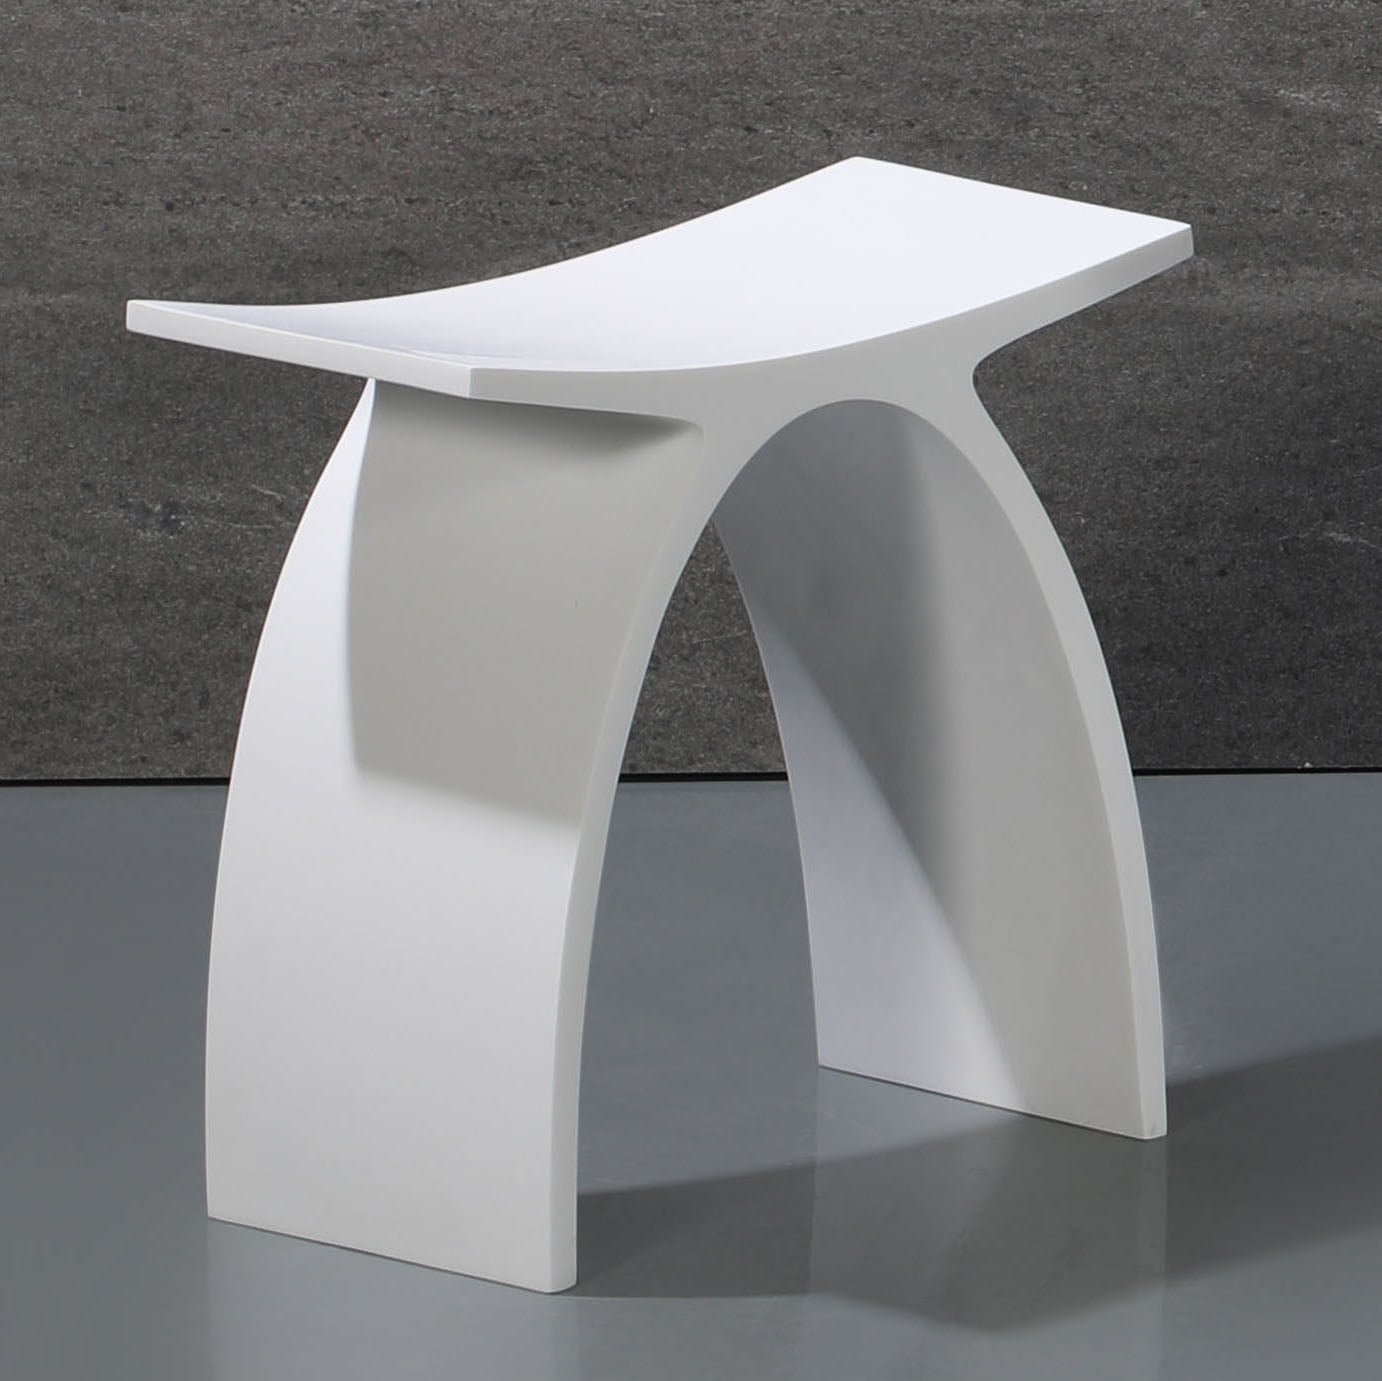 Abst77 Arched Solid Surface Resin Bathroom & Shower Stool, White Matte